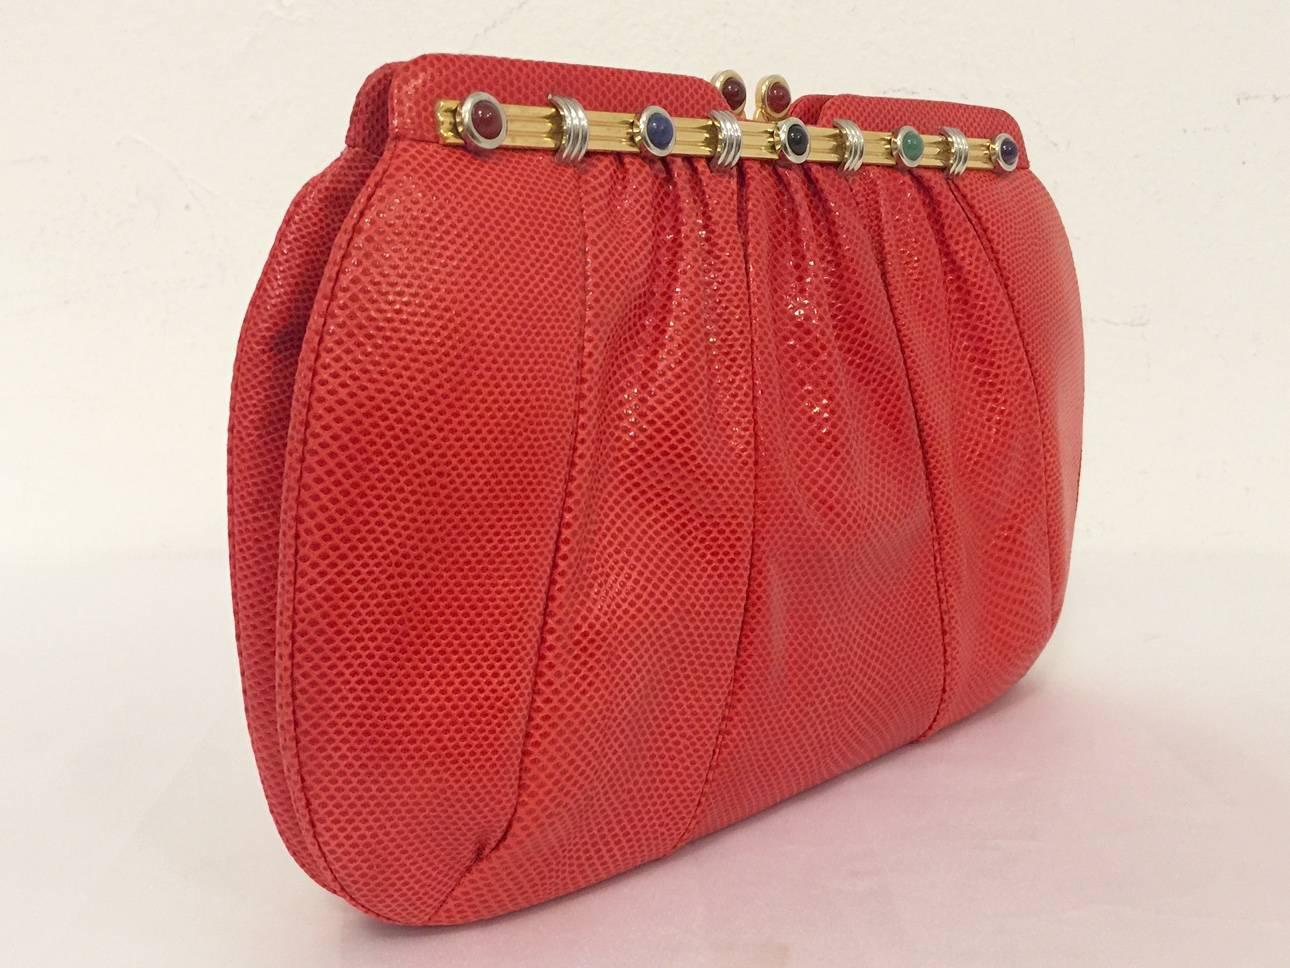 Vintage Red Lizard Evening Bag is highly desired by all collectors of Judith Leiber! Features slightly gathered, butter-soft lizard skin. Bag easily converts from clutch to shoulder bag using lizard strap with minimal effort! Forgiving gusset